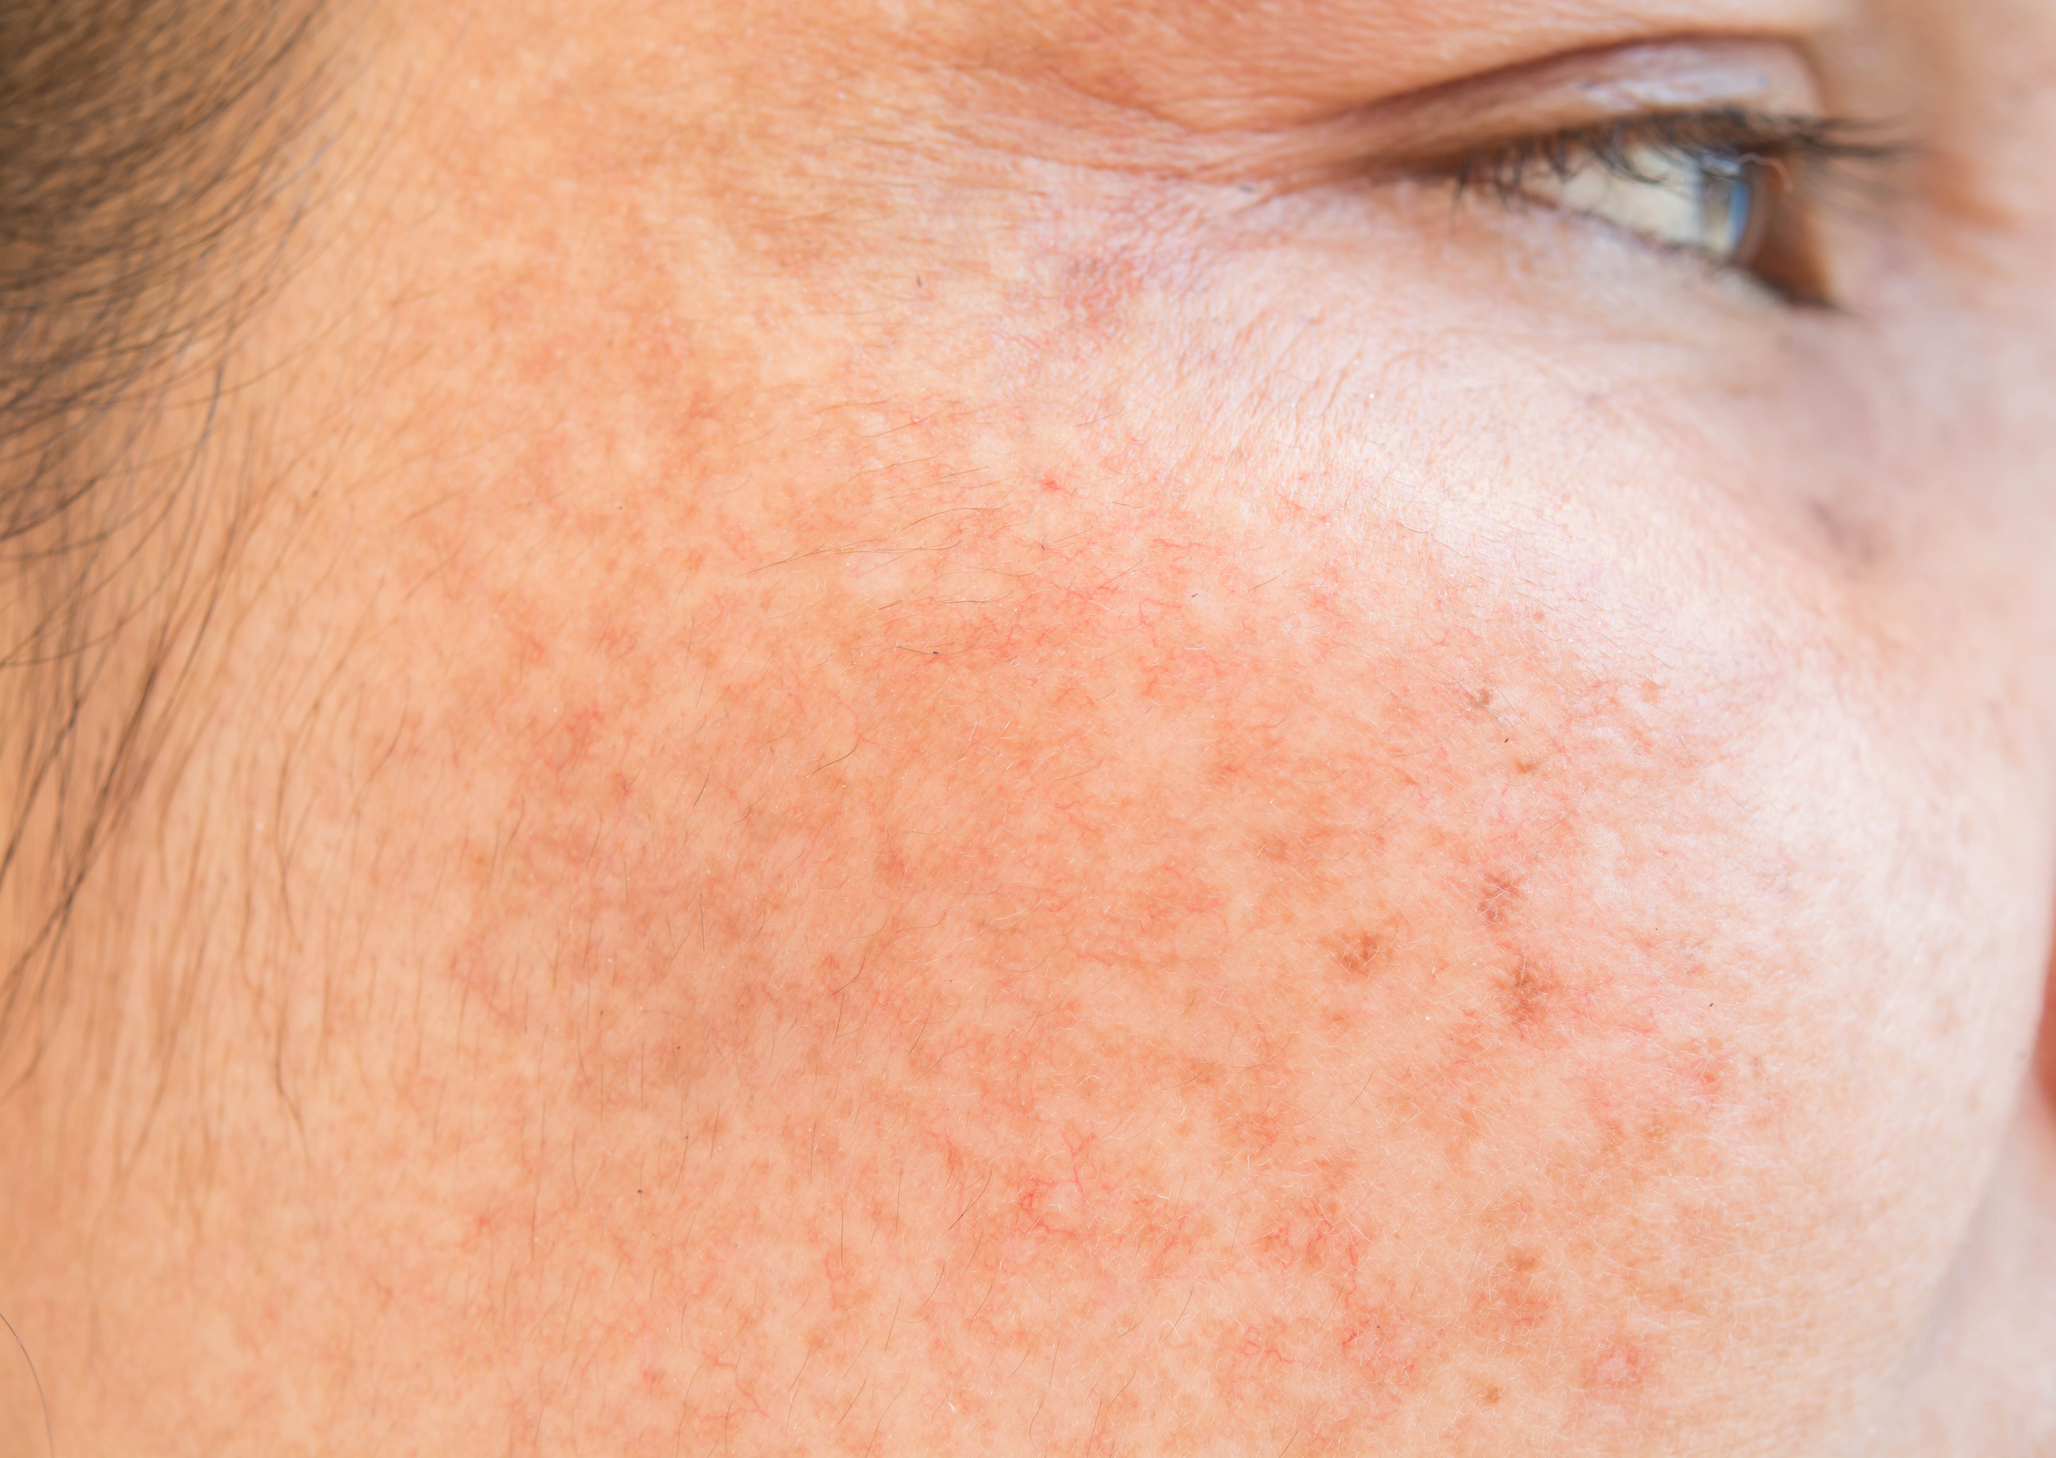 Q&A: What dark spots on skin and what works to fade them?